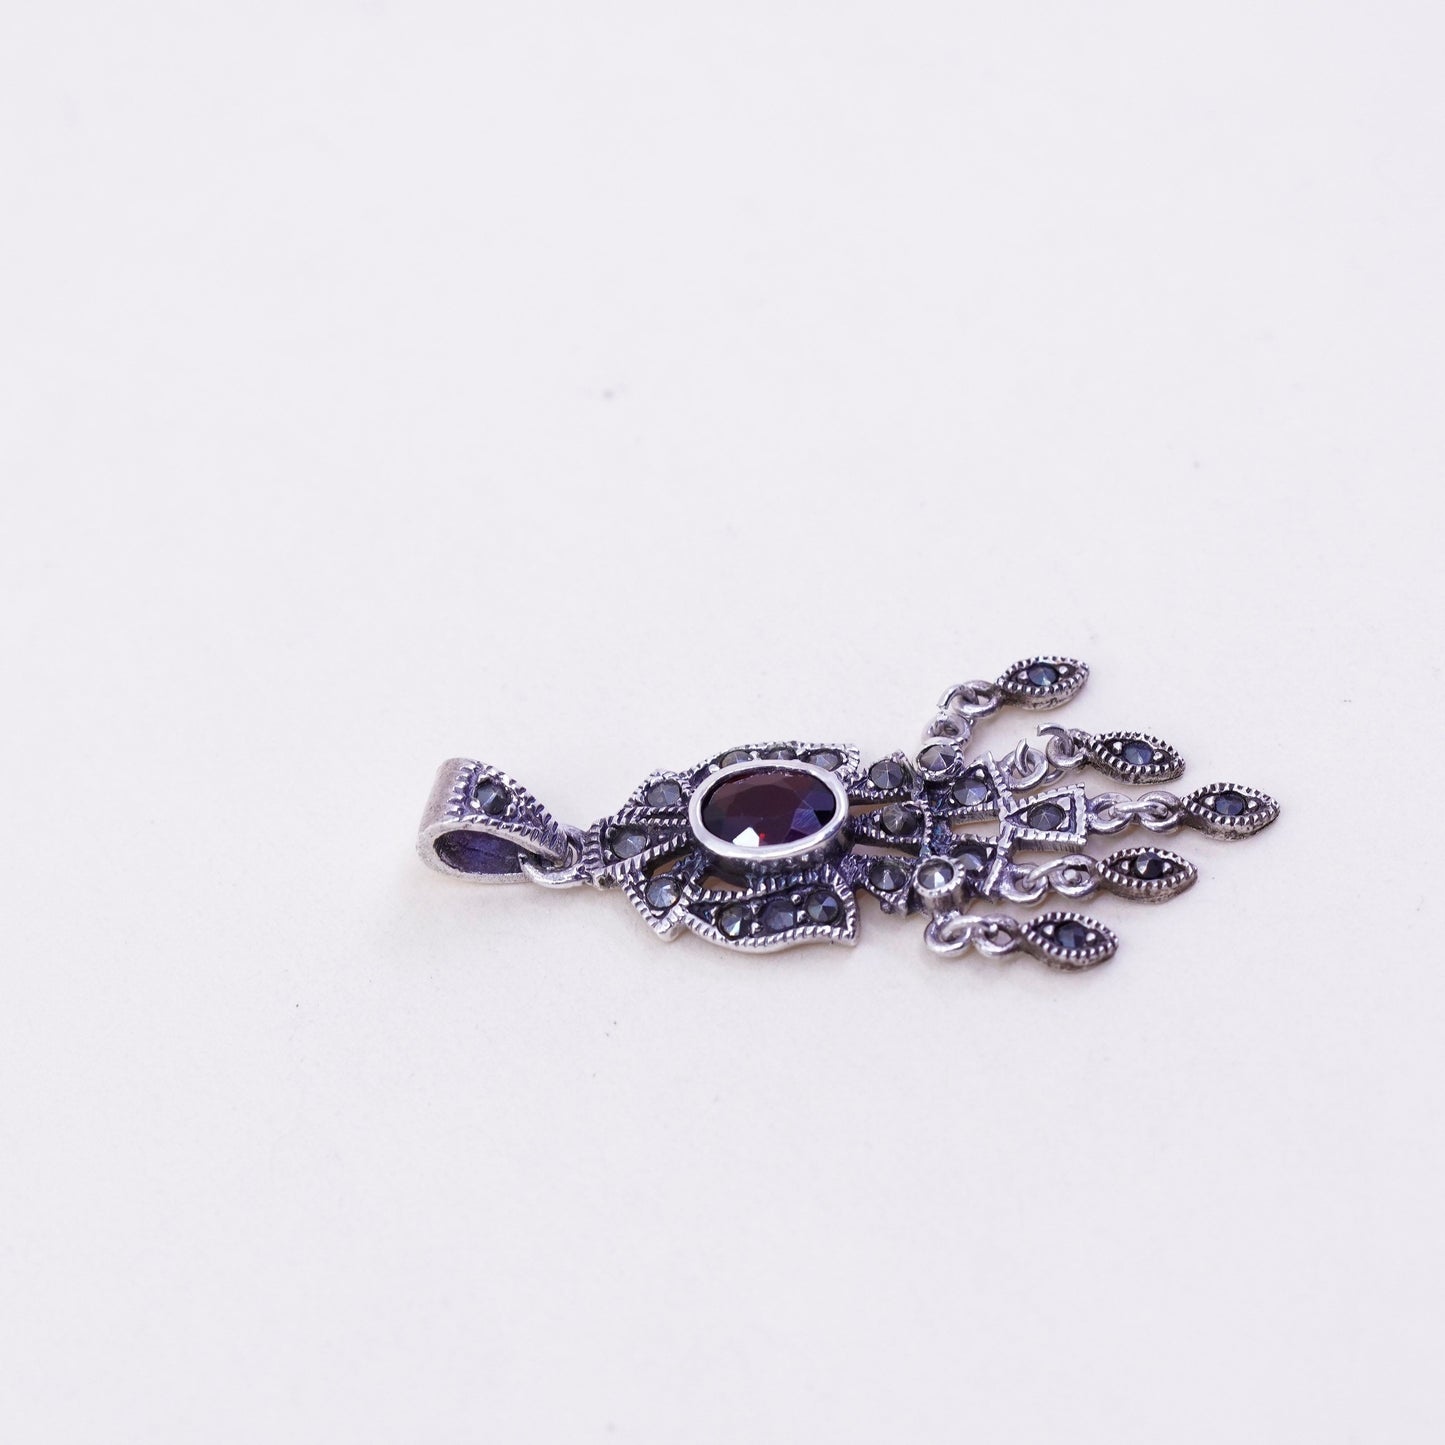 Vintage Sterling 925 silver handmade pendant with ruby and marcasite